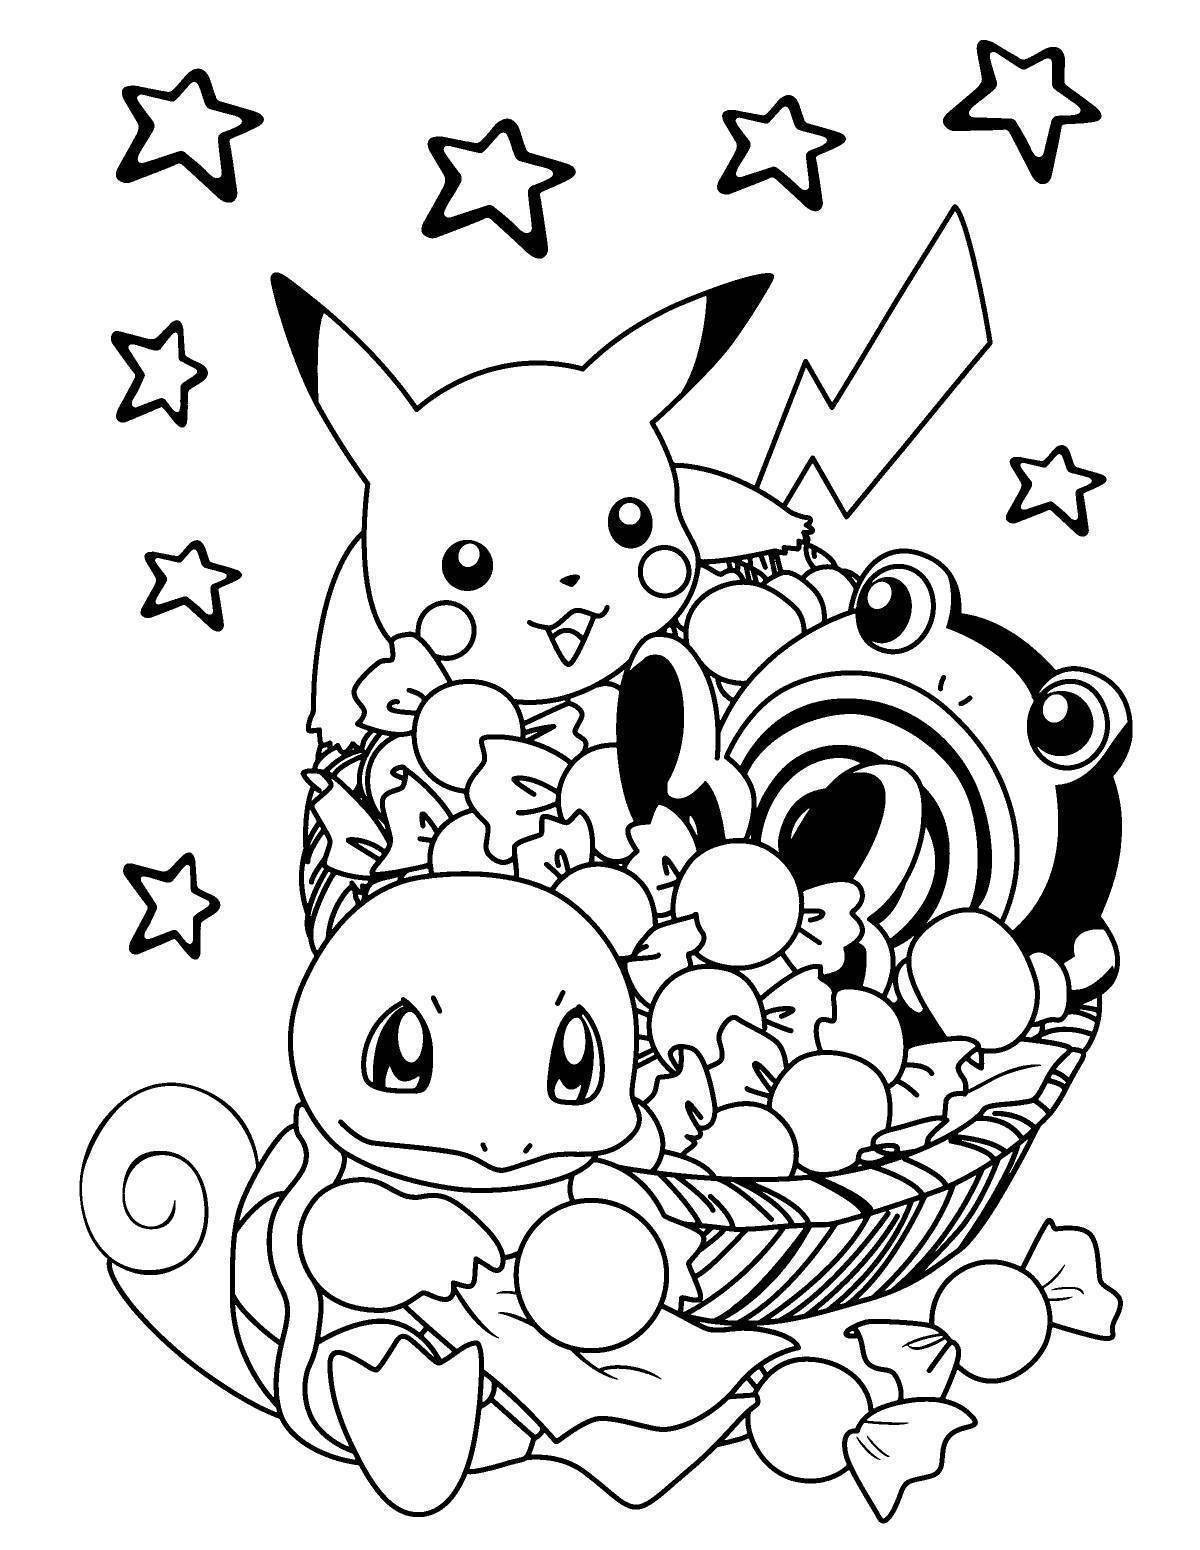 Animated pikachu coloring book for girls